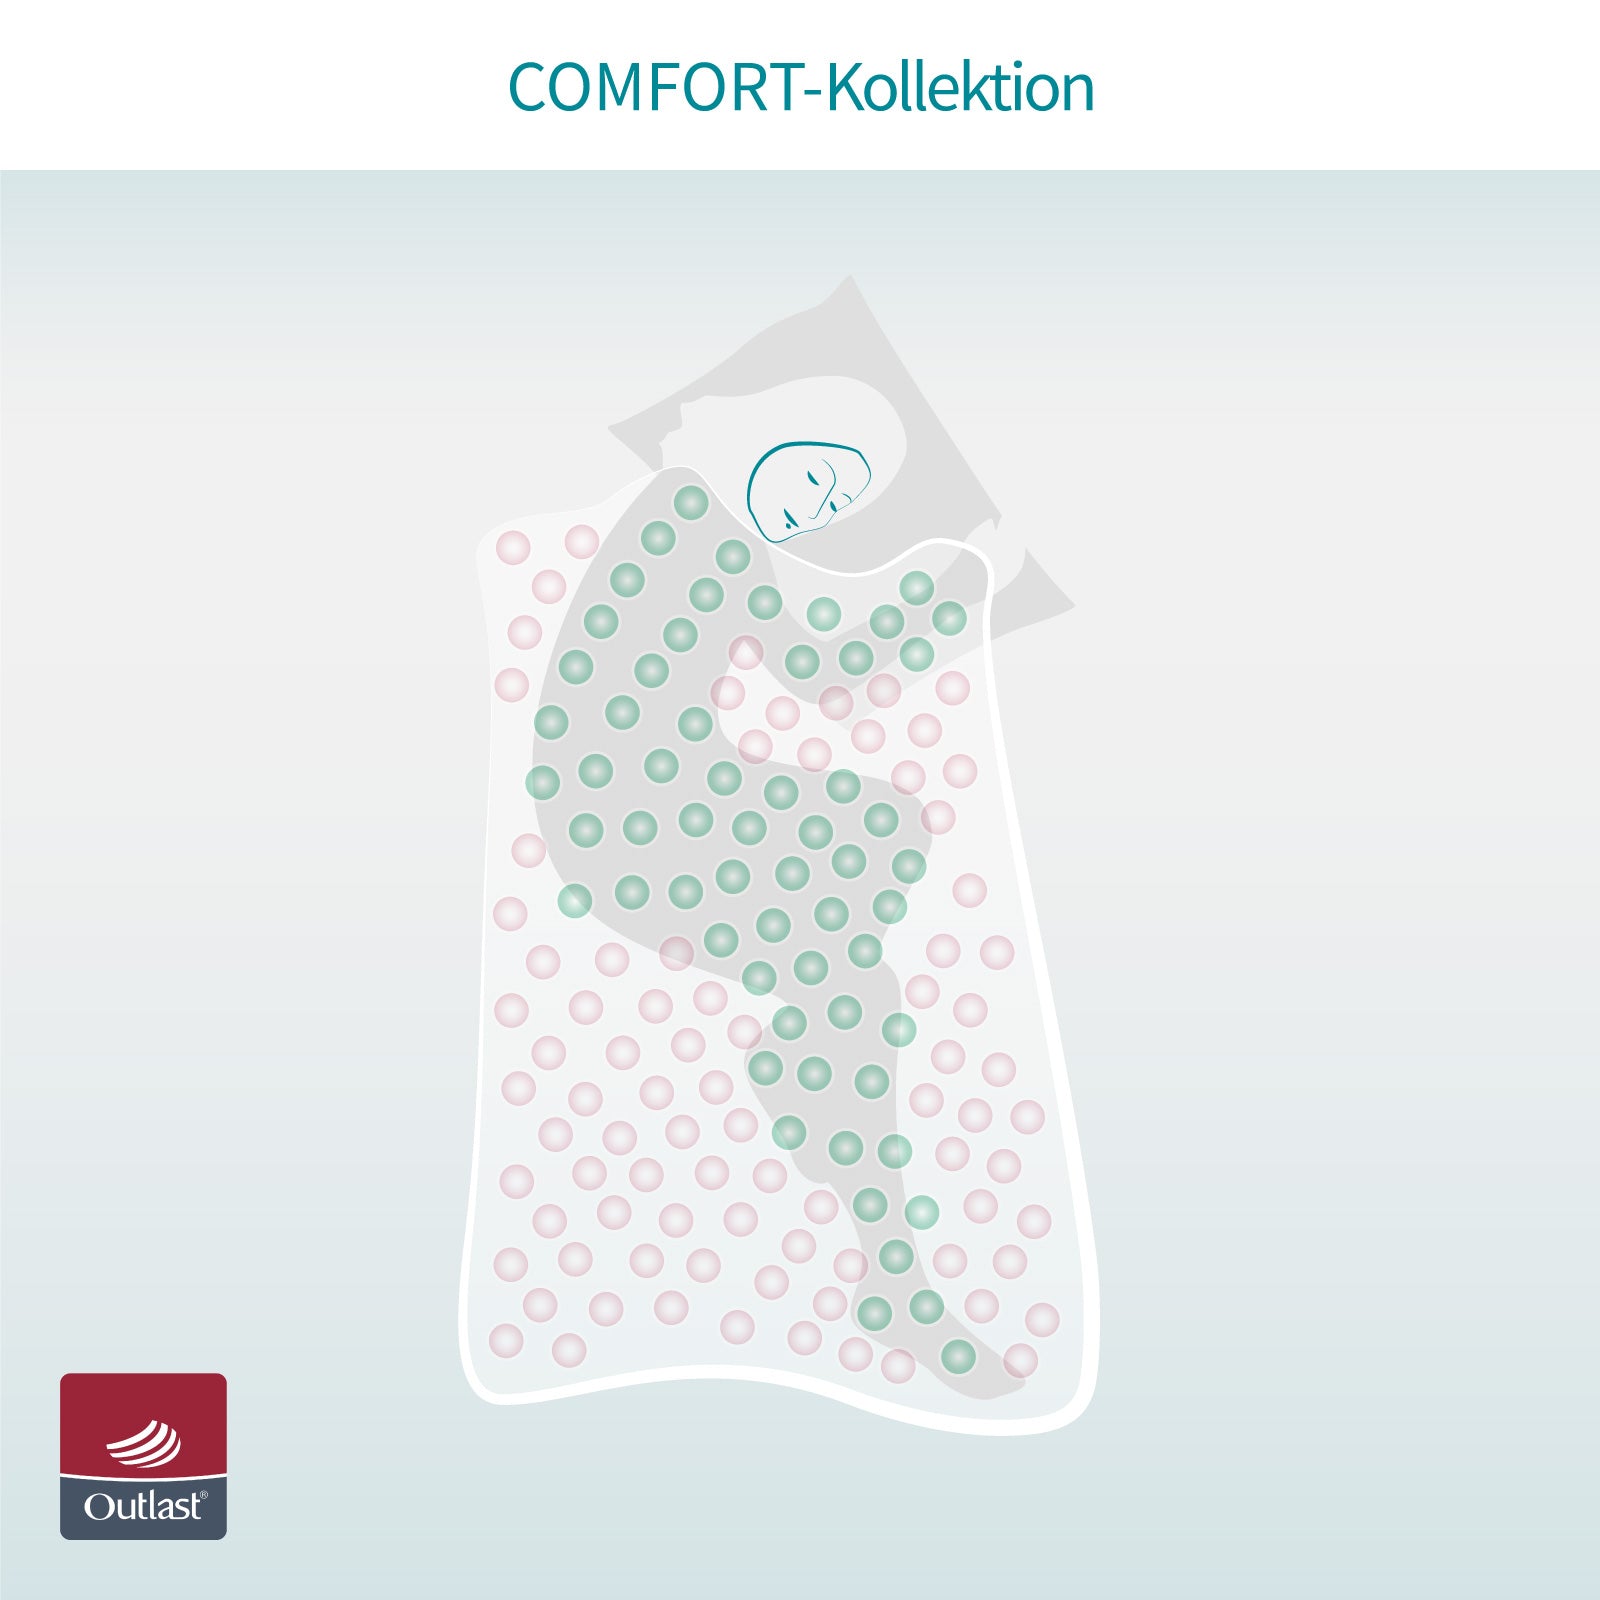 Temperature-regulating duvet (400g-490g) COOL.EMOTIONS - Light, breathable duvet - Not too warm, not too cold